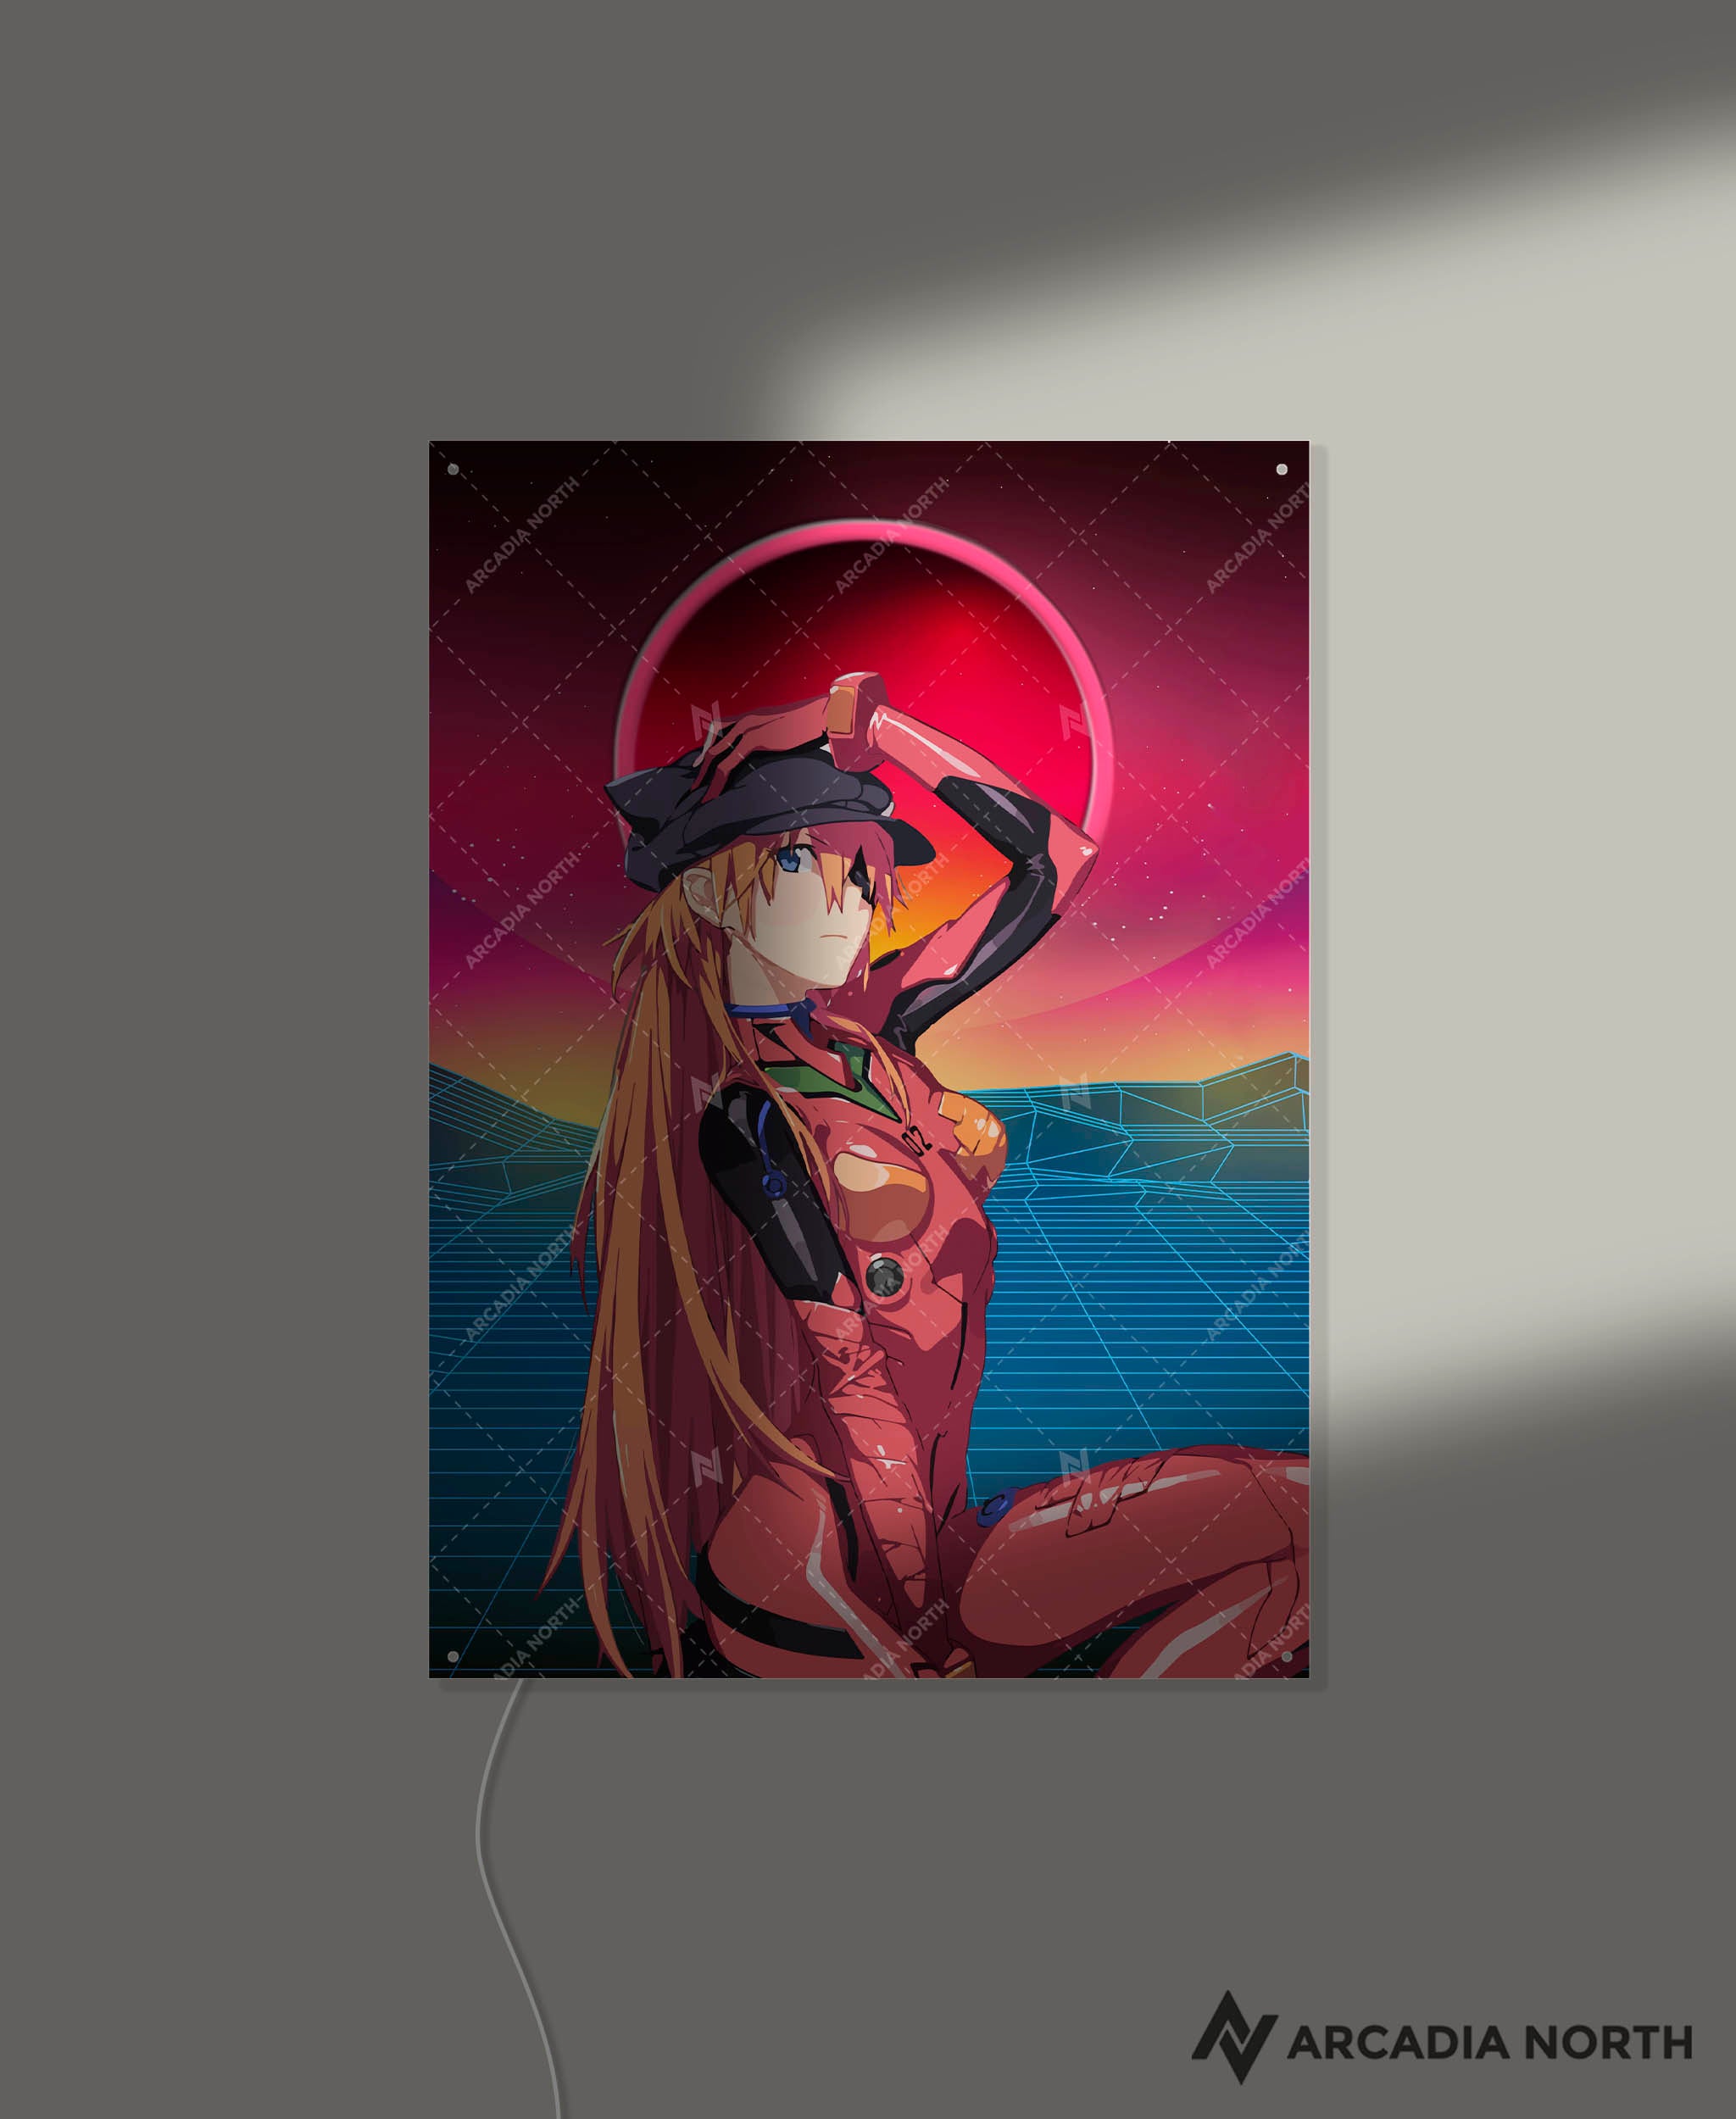 Arcadia North AURALIGHT - an LED Poster featuring the anime Neon Genesis Evangelion with Asuka Langley Soryu on a synthwave style backdrop. Illuminated by glowing neon LED lights. UV-printed on acrylic.